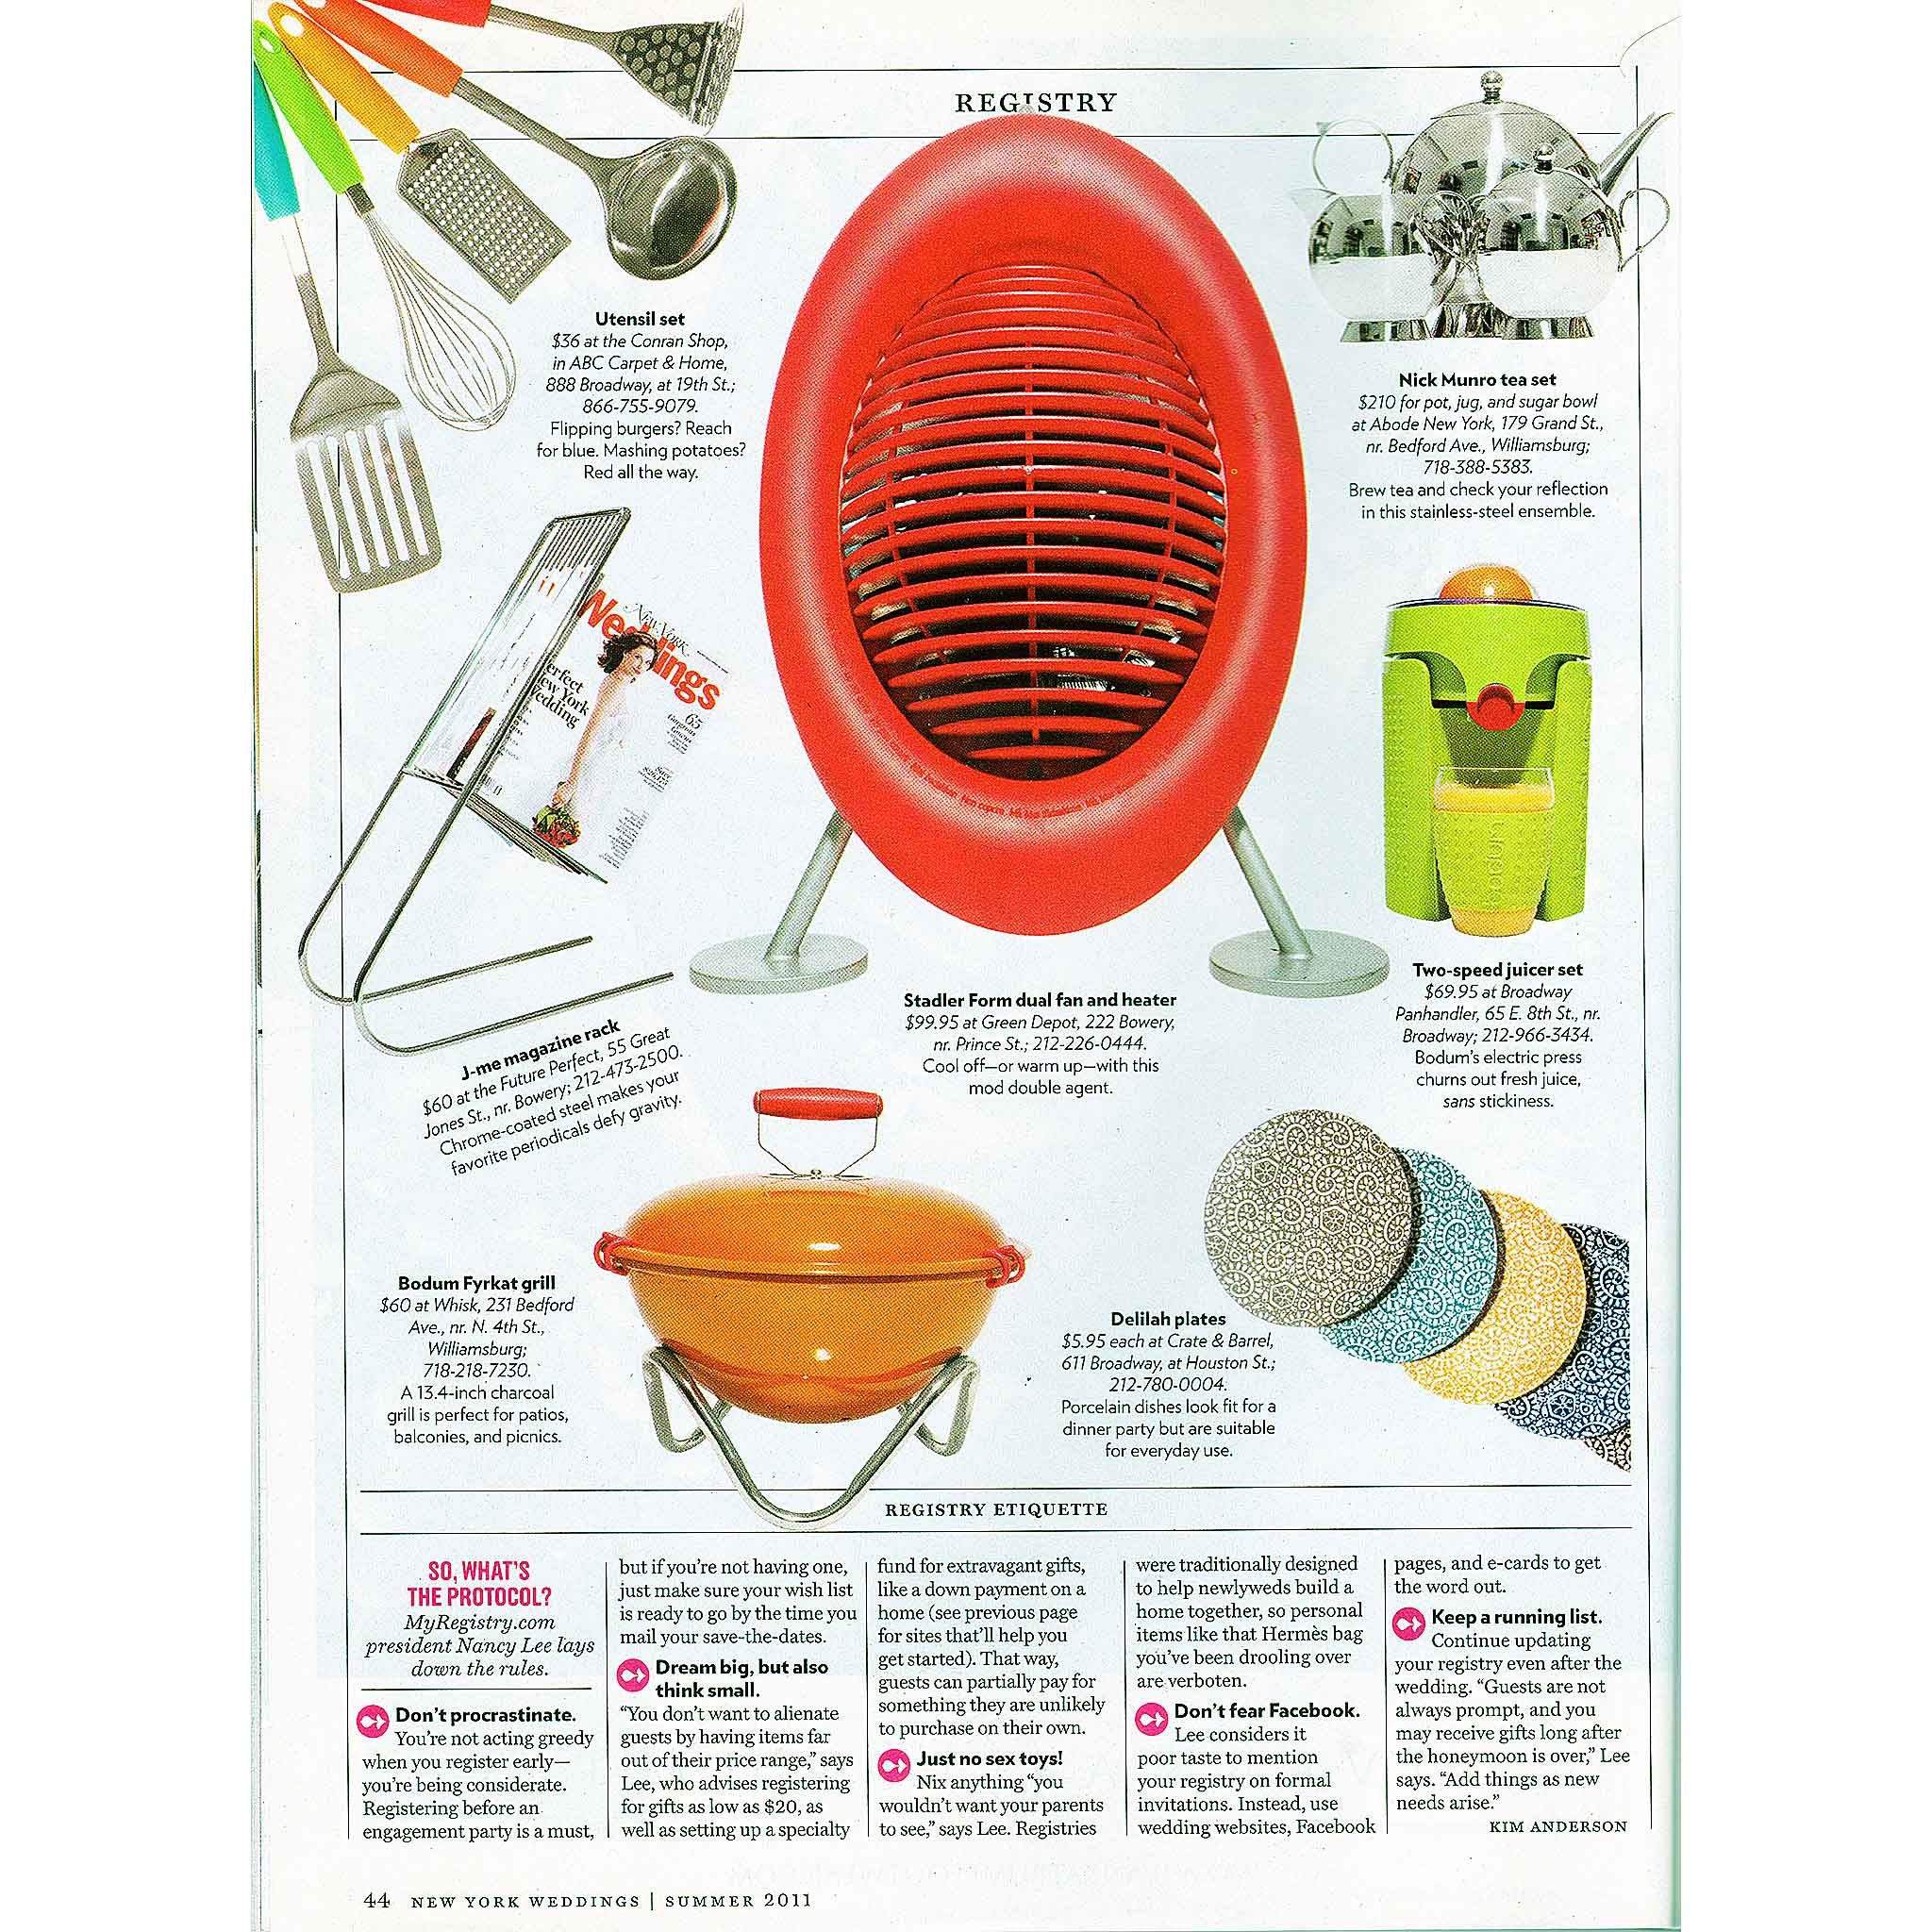 New York Weddings, "The Checklist: Gifts You'll Love - ISAK Co. UK's Blossom & Bill mugs and Nick Munro's Sunfish tea serving set," Summer 2011, pages 42 & 44.